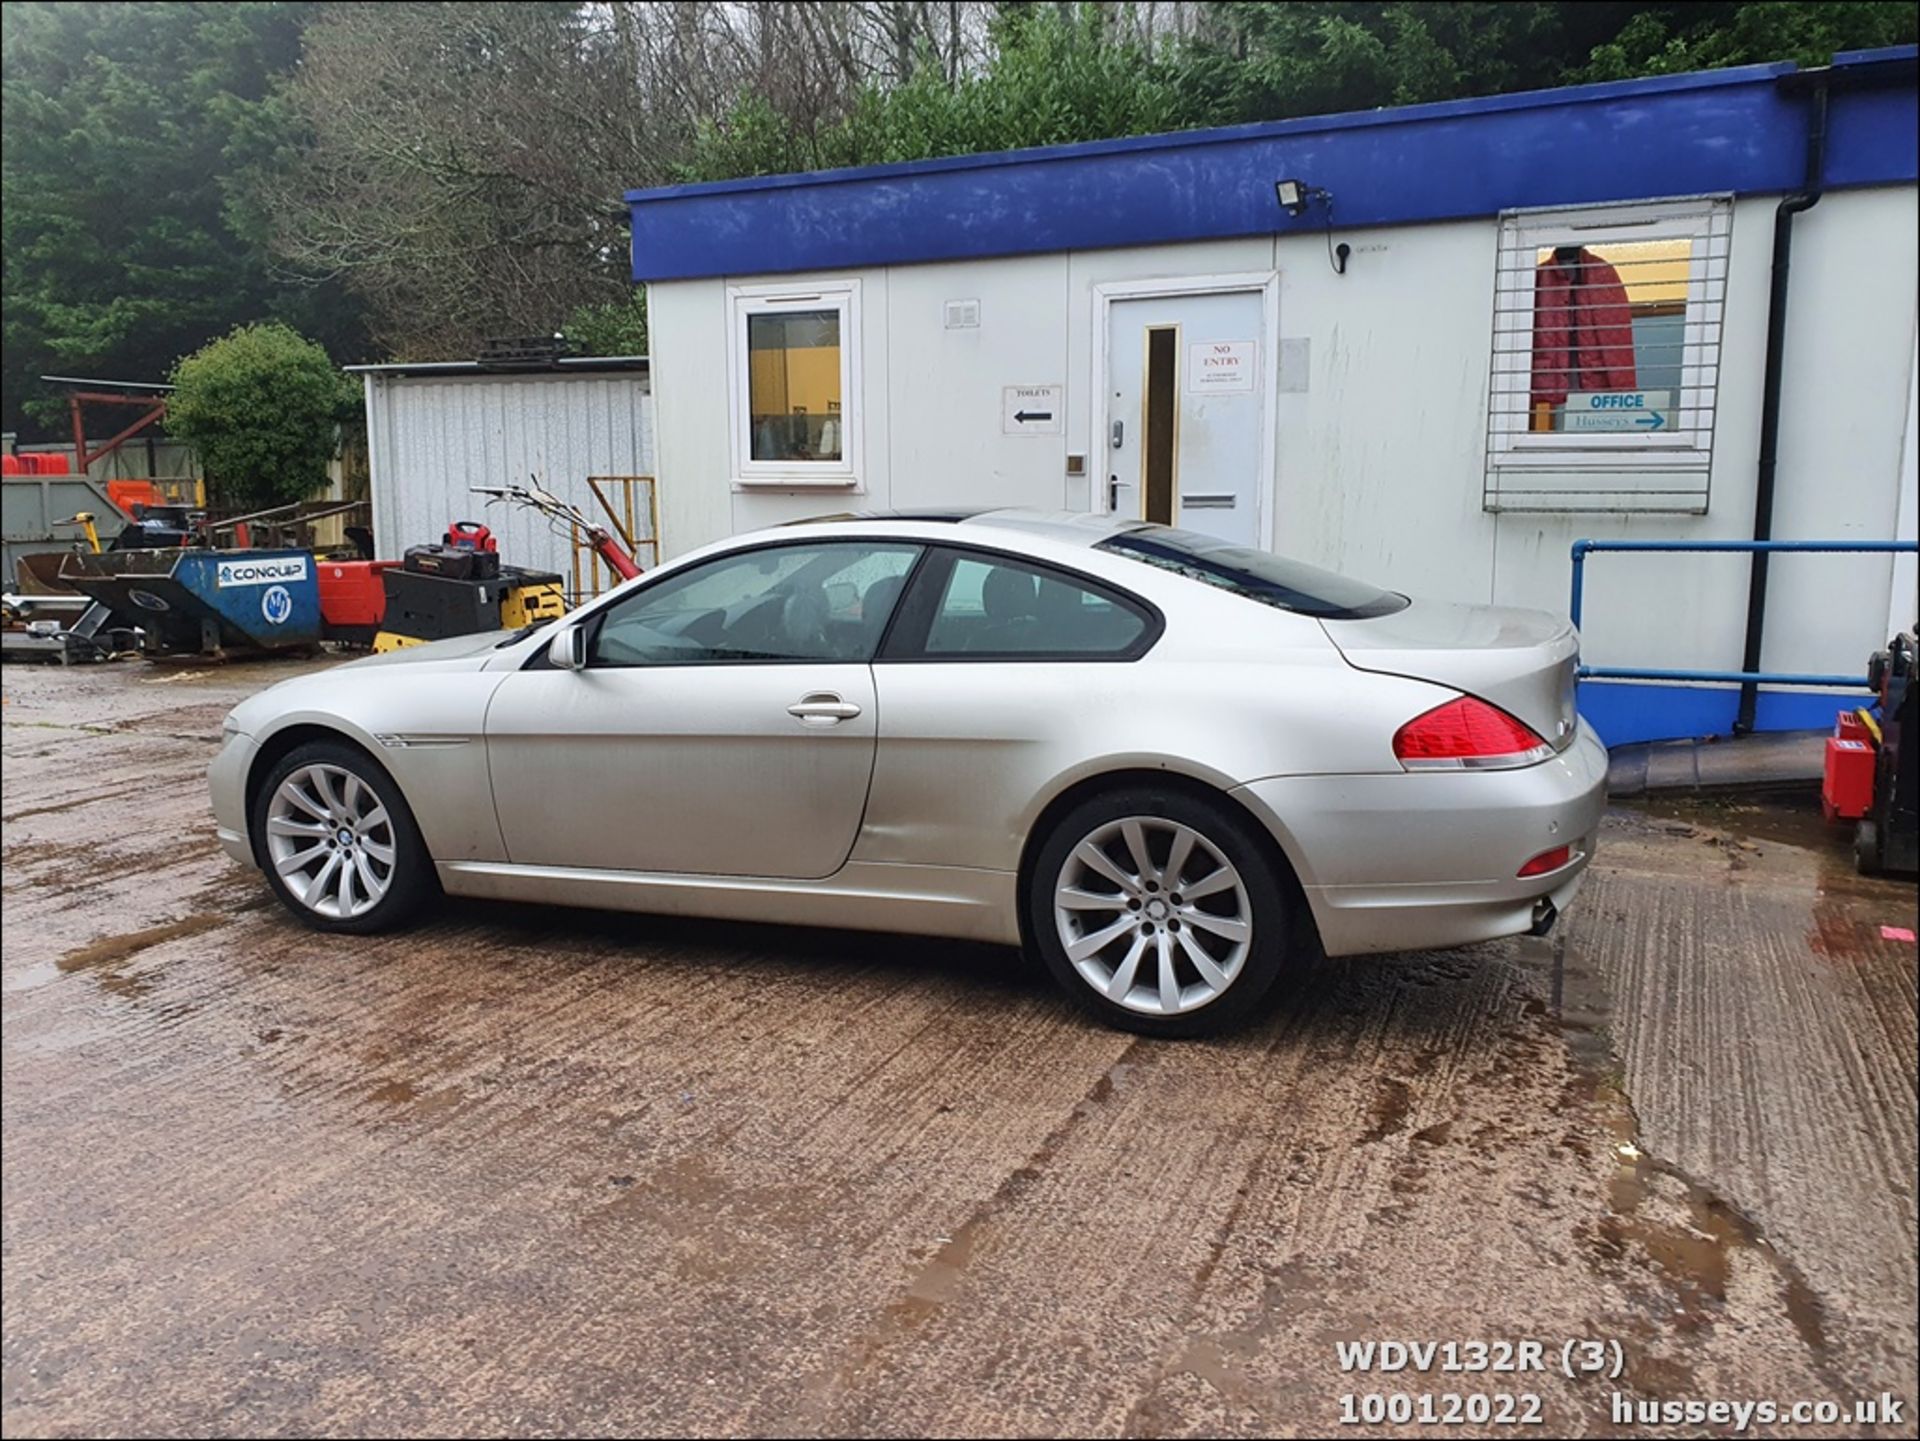 2006 BMW 650I SPORT AUTO - 4799cc 2dr Coupe (Silver) - Image 2 of 33